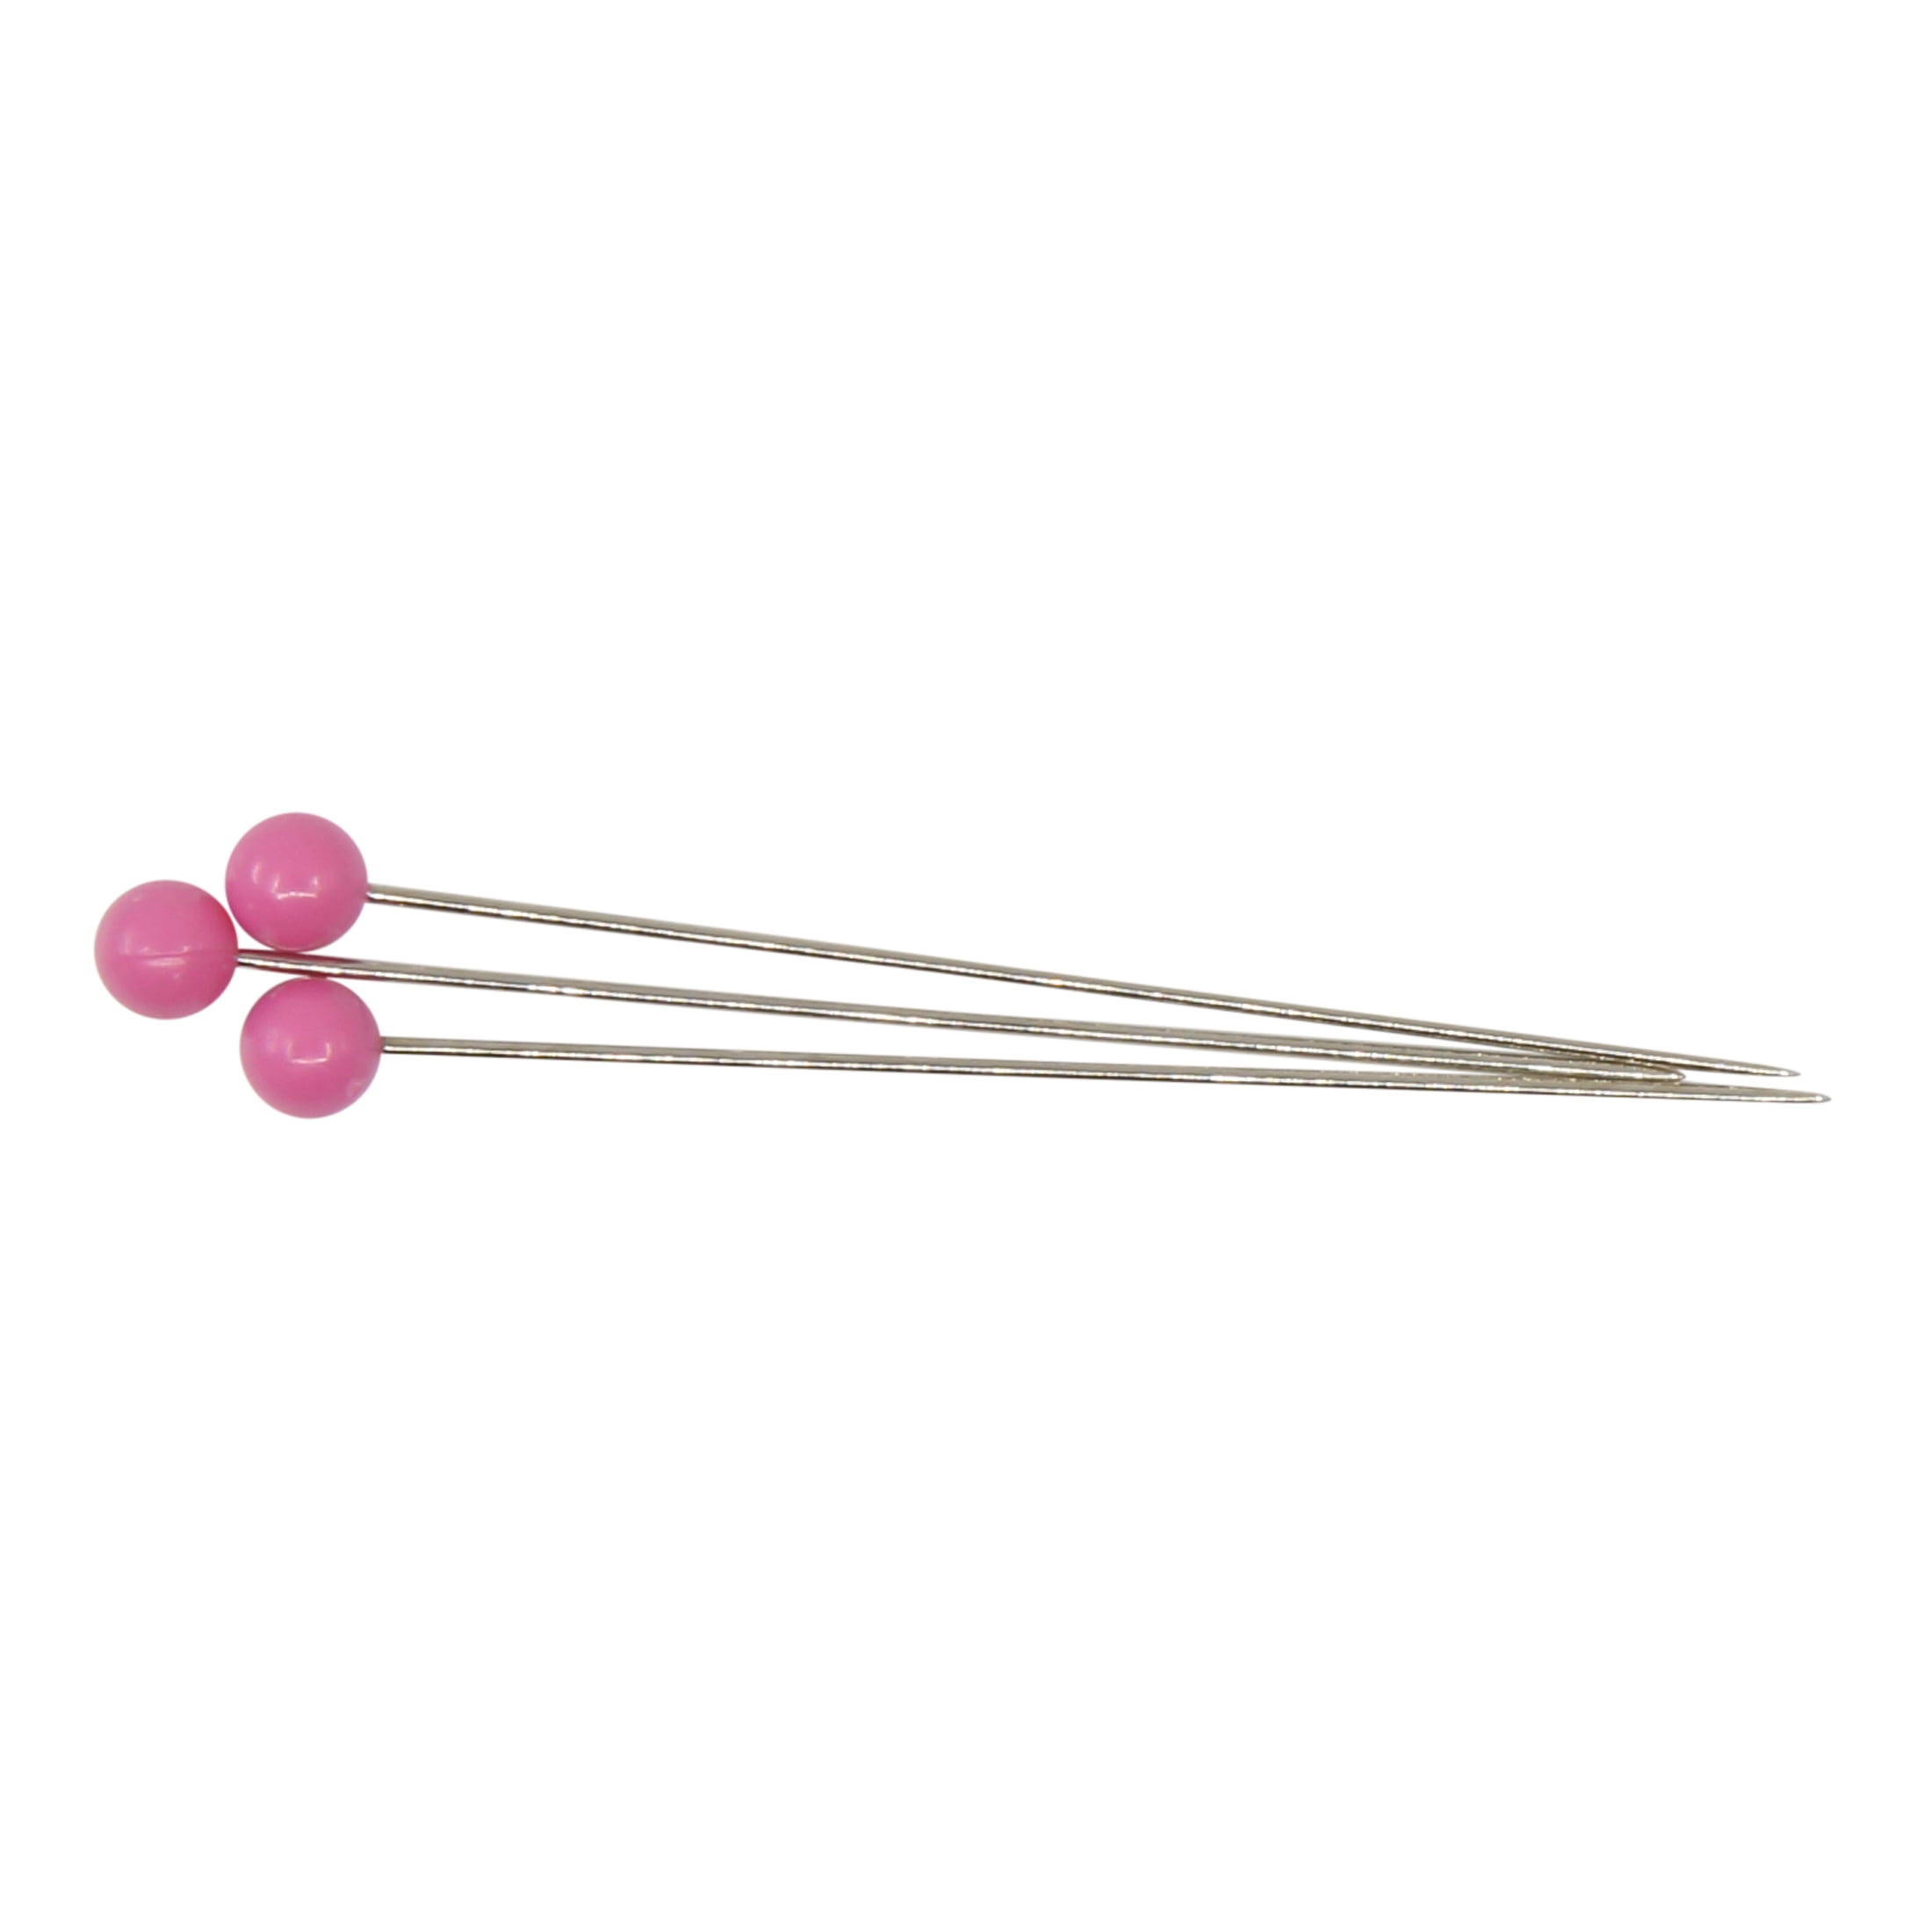 Notions - Dritz Quilter's Straight Pins # 1461 - Size 3 - 2 inches Lon